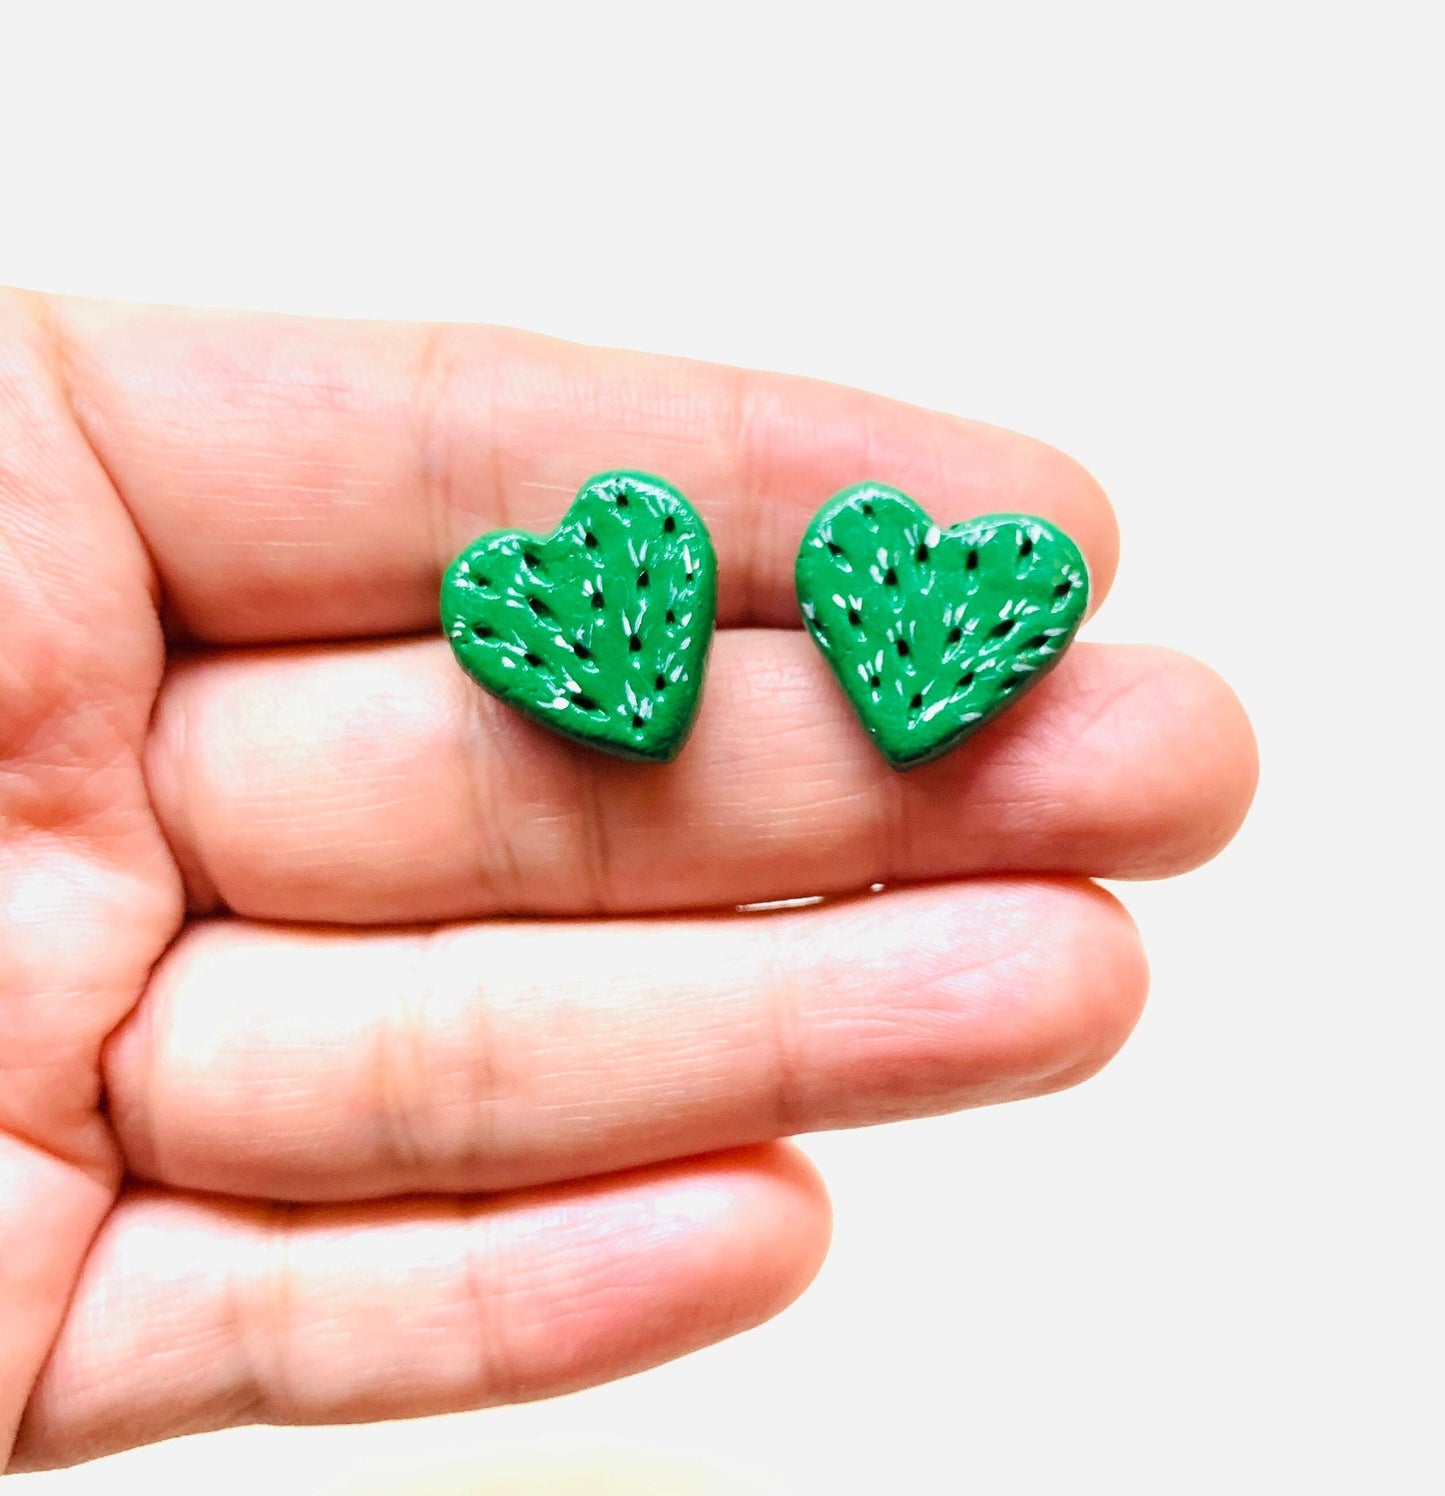 Lovely Multi-Punctured-Carved Cactus Heart Stud Earrings Clay Jewelry Mexico Folk ArtToWear Birthday Gift Idea Girls Women Claywelry Aretes